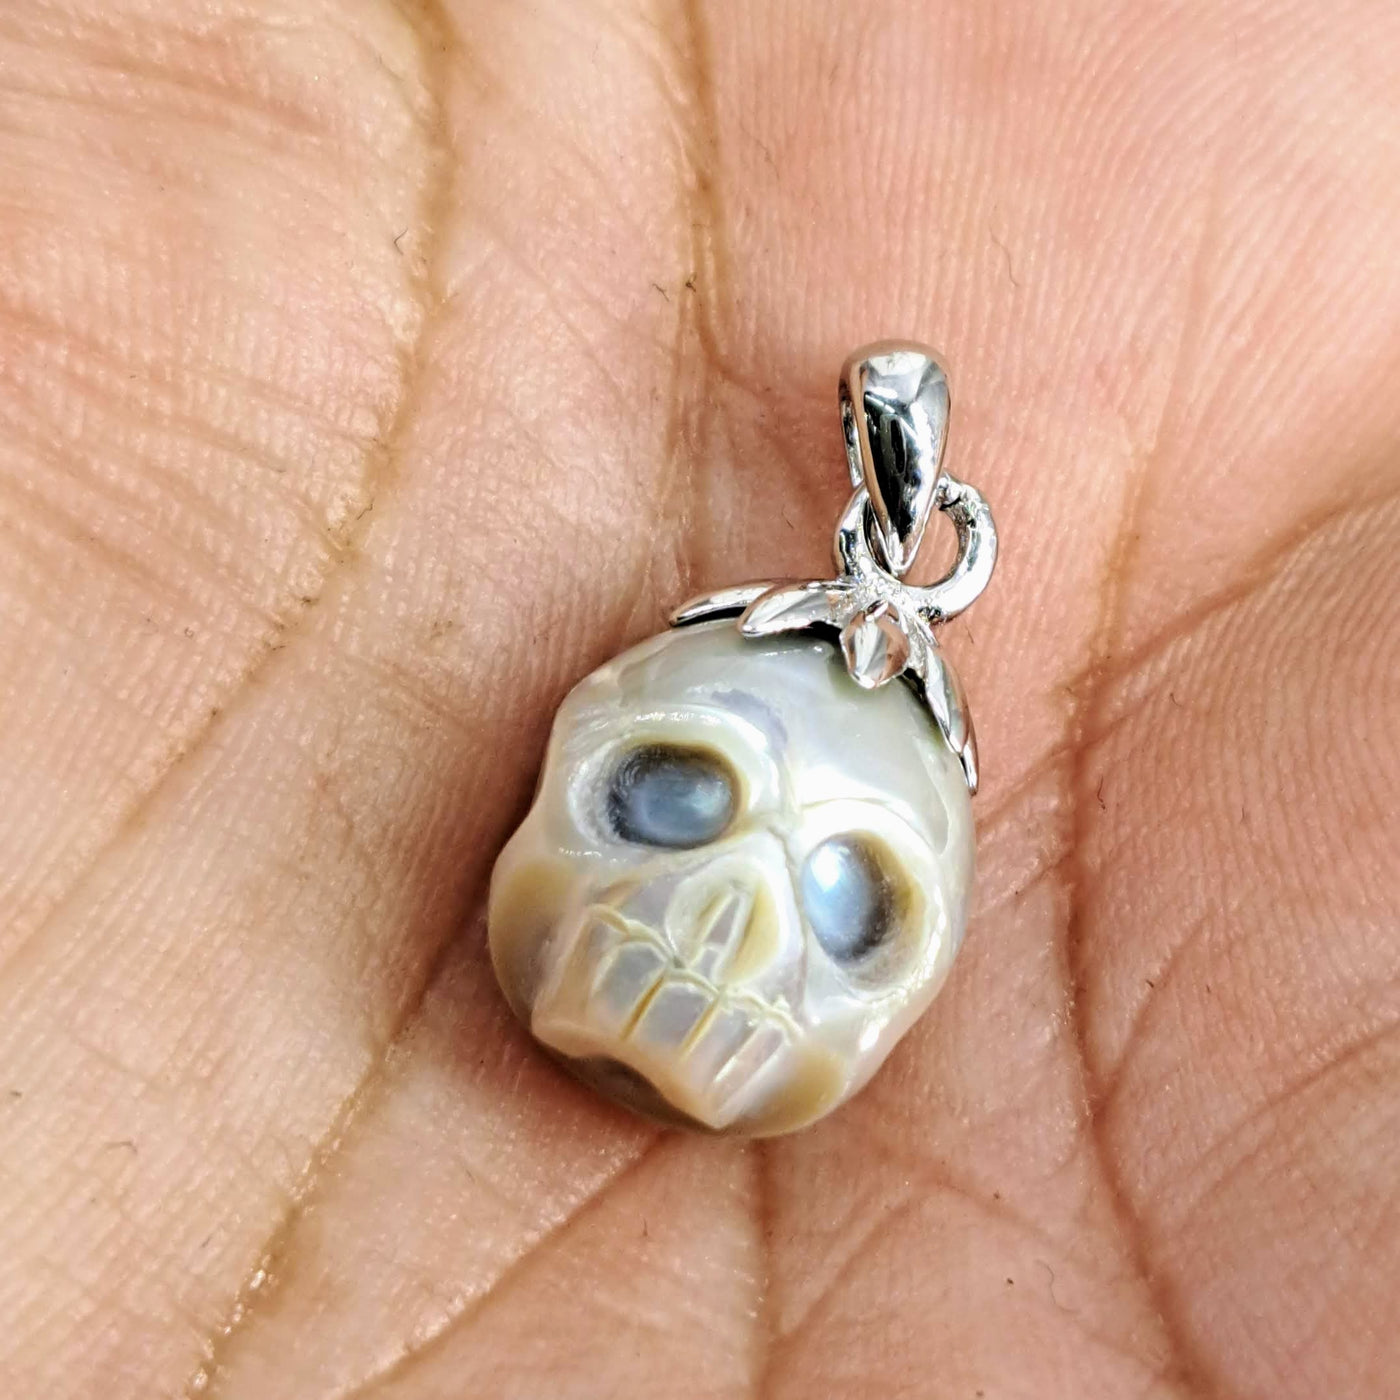 "Bone Island Charmer" Pendant Necklace - (Silver Or White) Carved Pearl Skull, Sterling